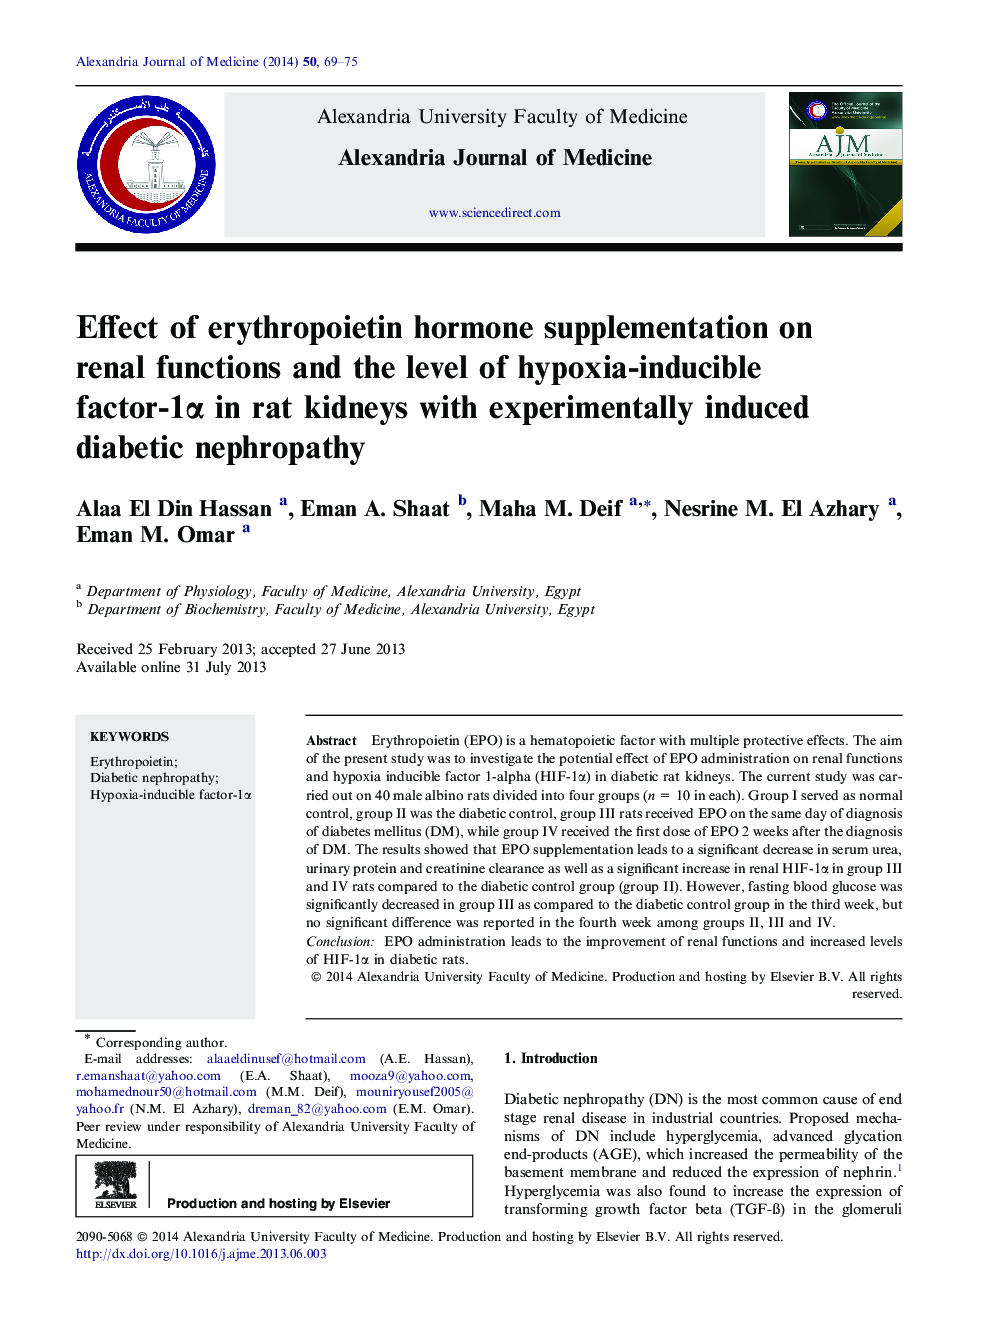 Effect of erythropoietin hormone supplementation on renal functions and the level of hypoxia-inducible factor-1α in rat kidneys with experimentally induced diabetic nephropathy 